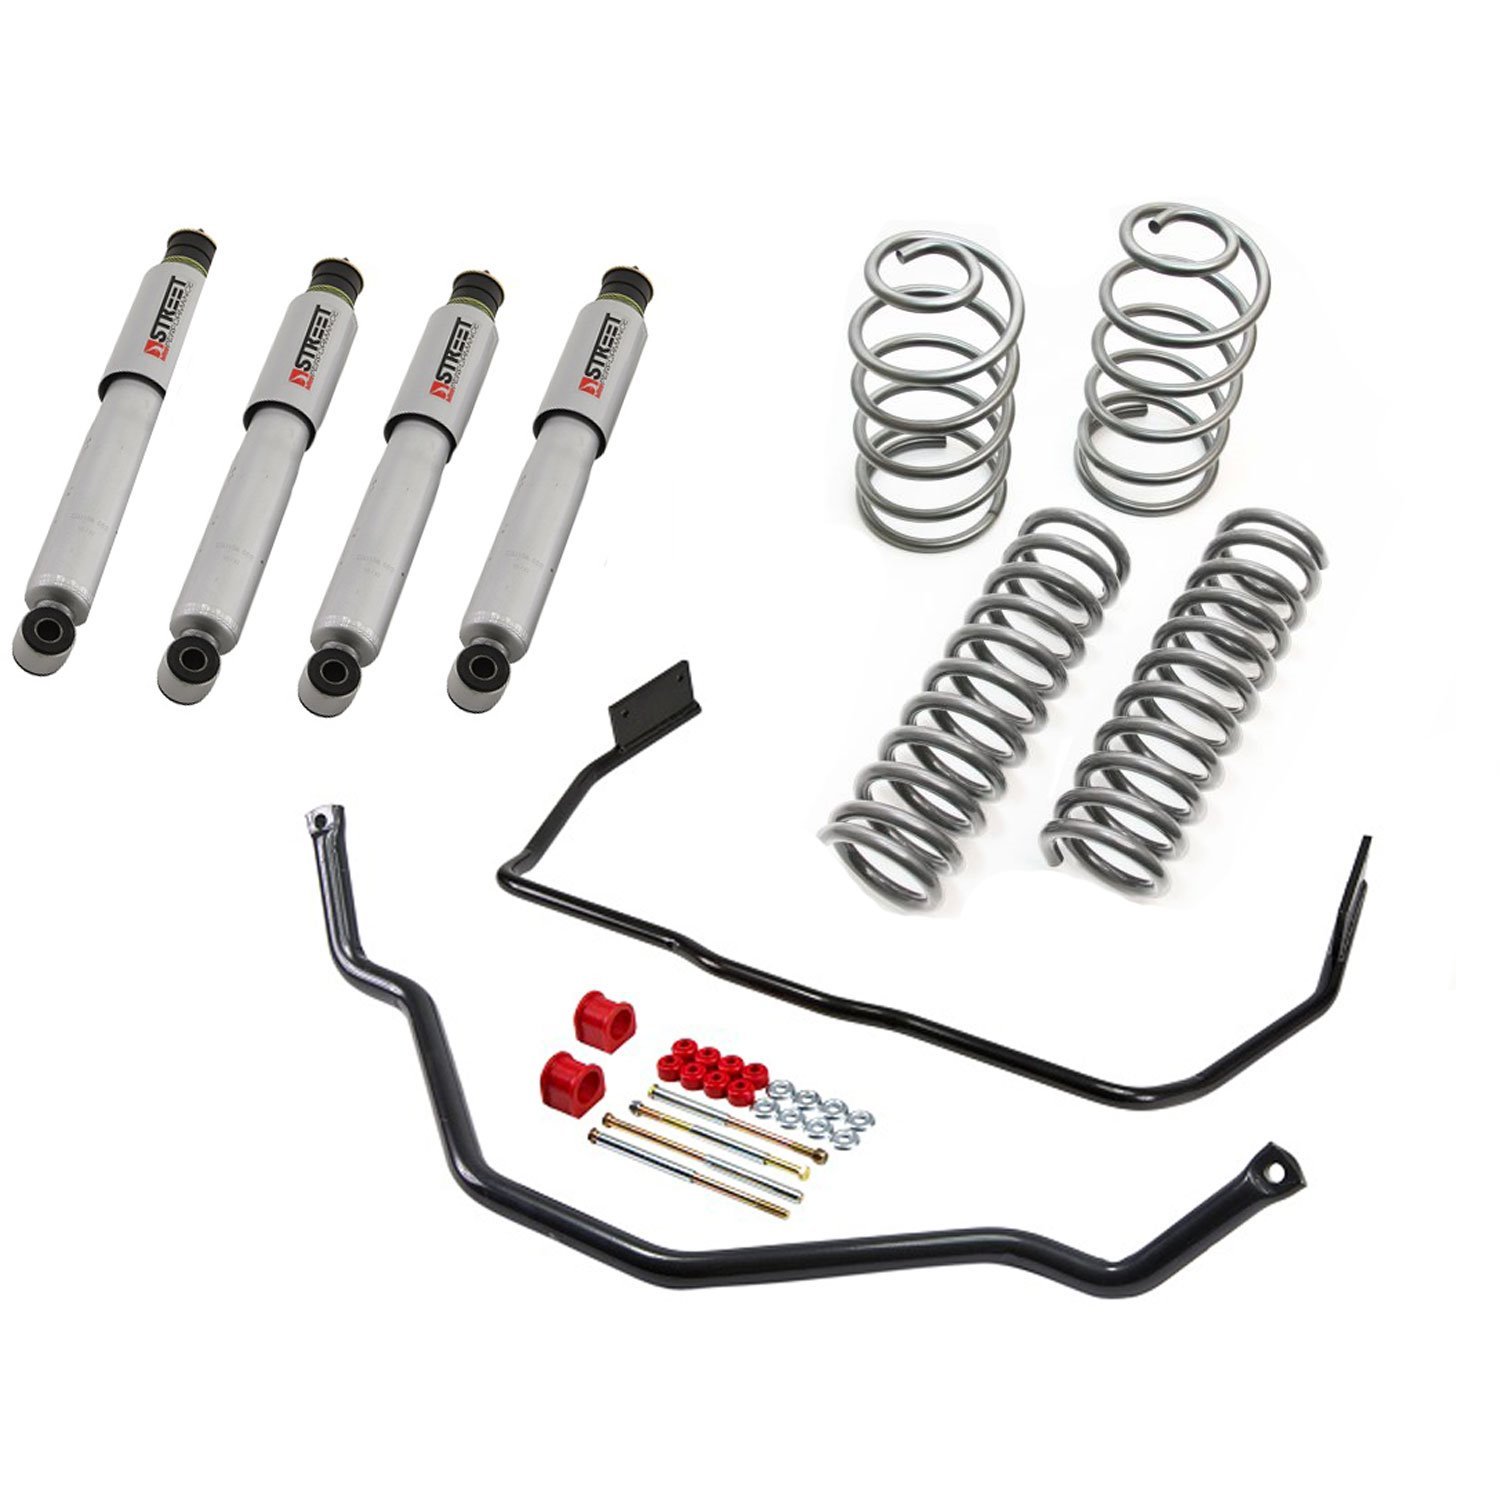 Muscle Car Suspension Kit for 1994-2004 Ford Mustang